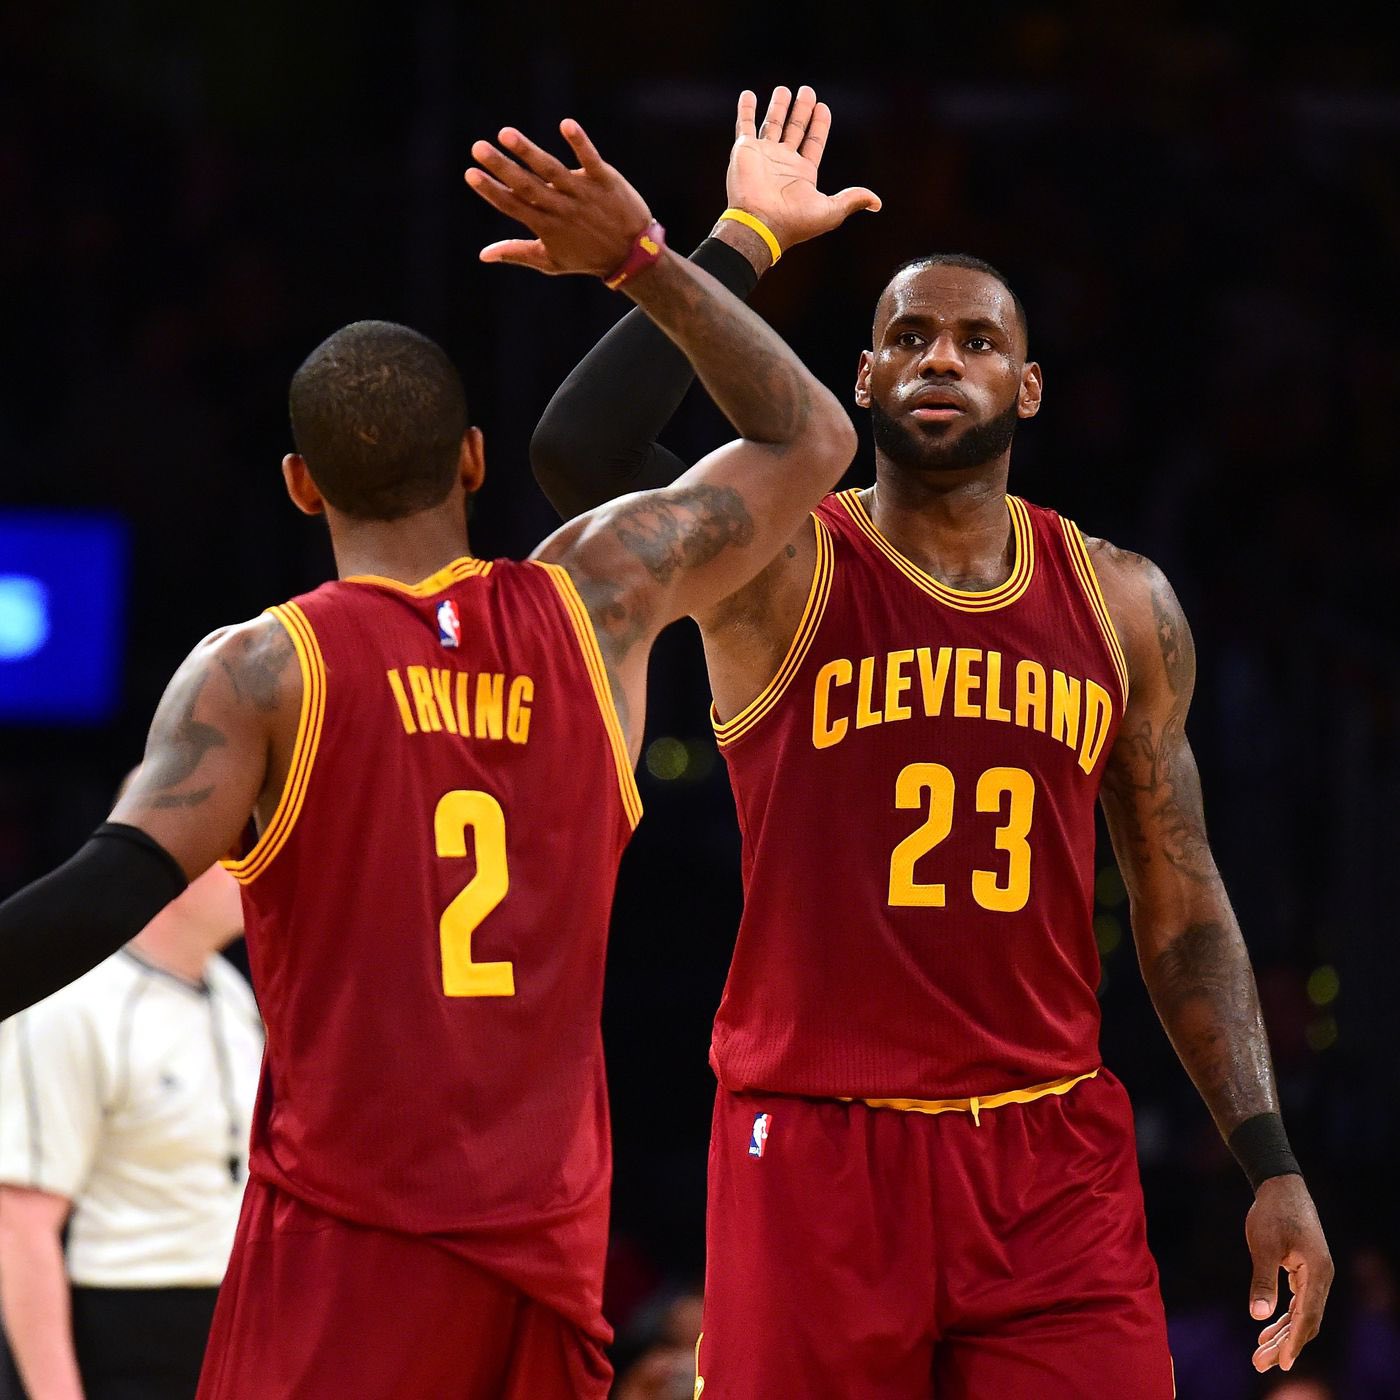 Lakers News: LeBron James Reminisces on Former Partnership with Kyrie Irving  - All Lakers | News, Rumors, Videos, Schedule, Roster, Salaries And More